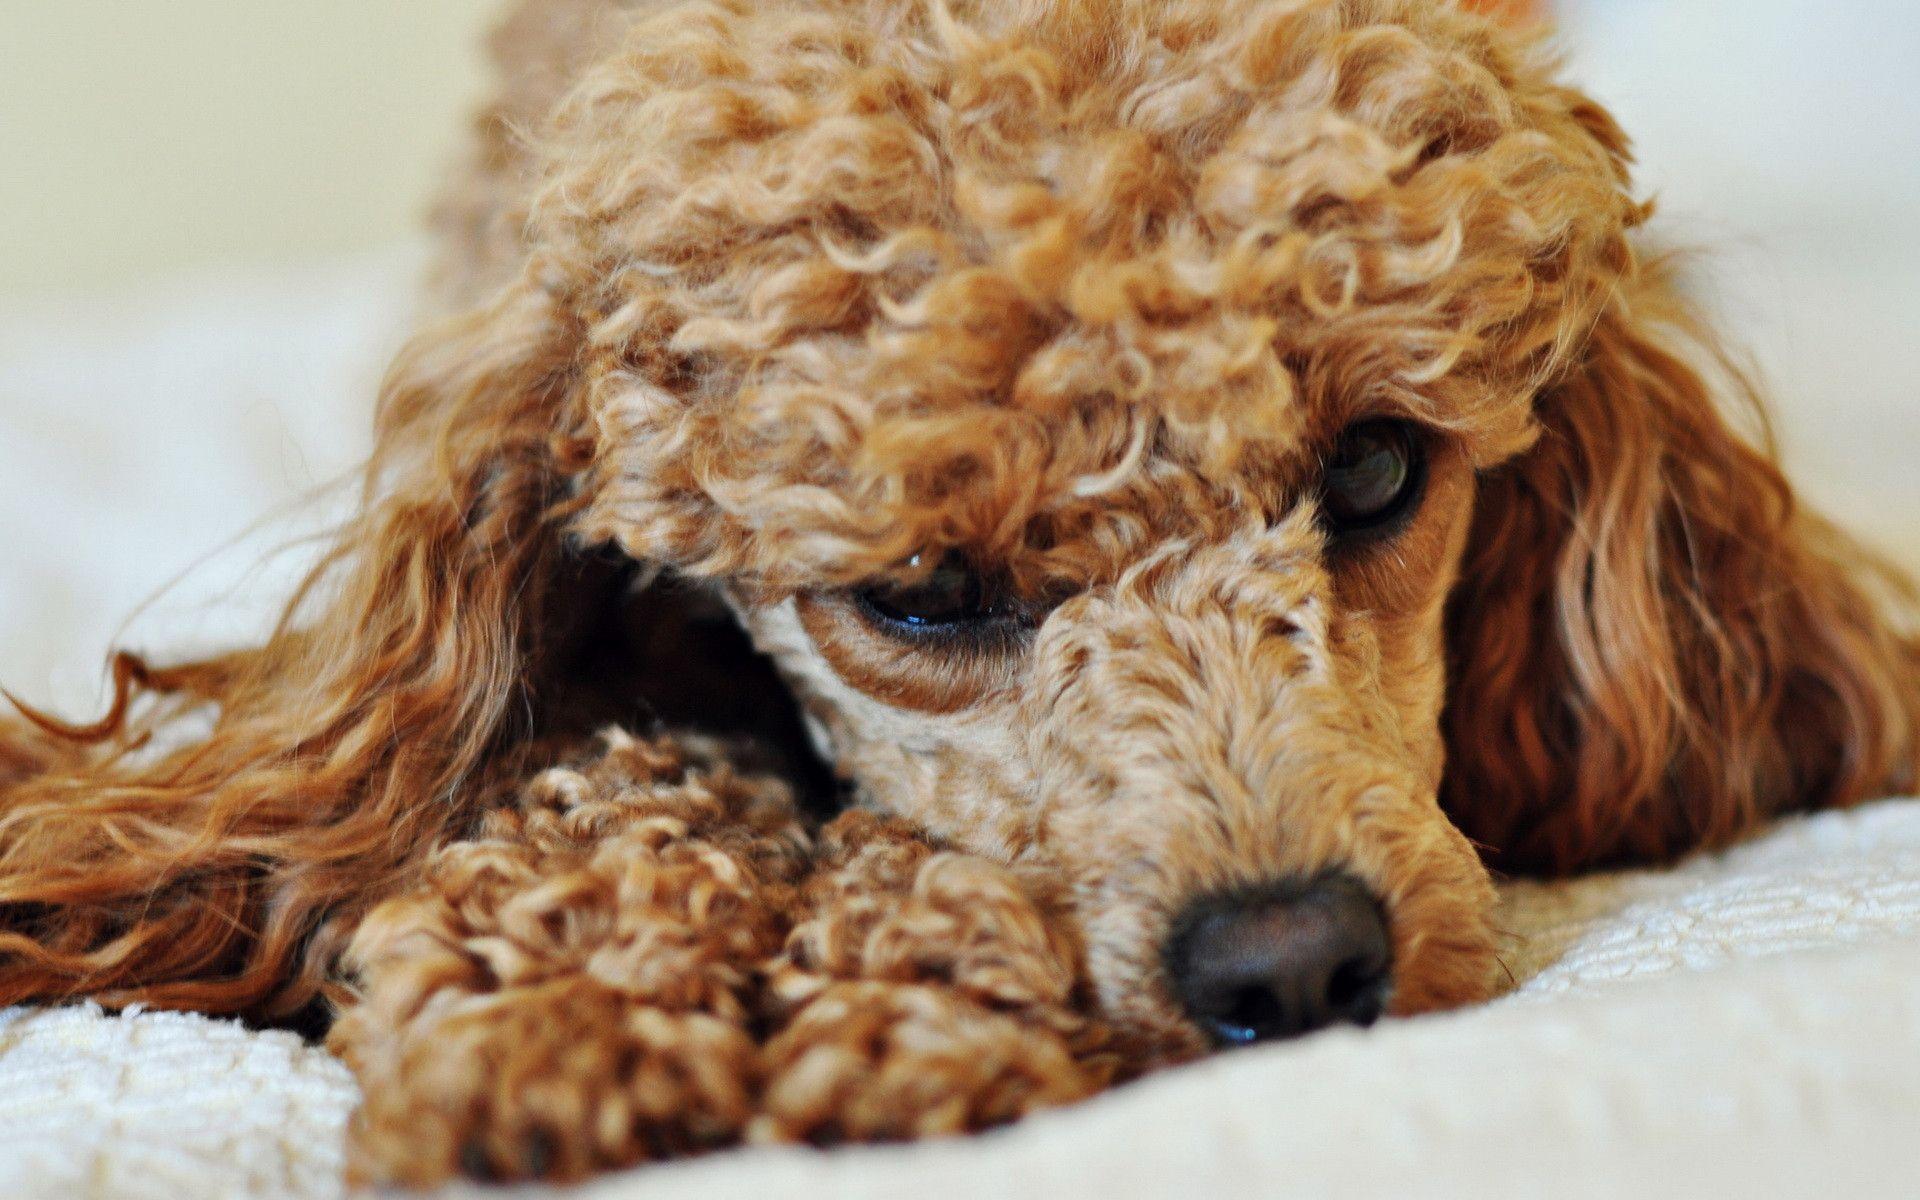 Poodle wallpaper and image, picture, photo